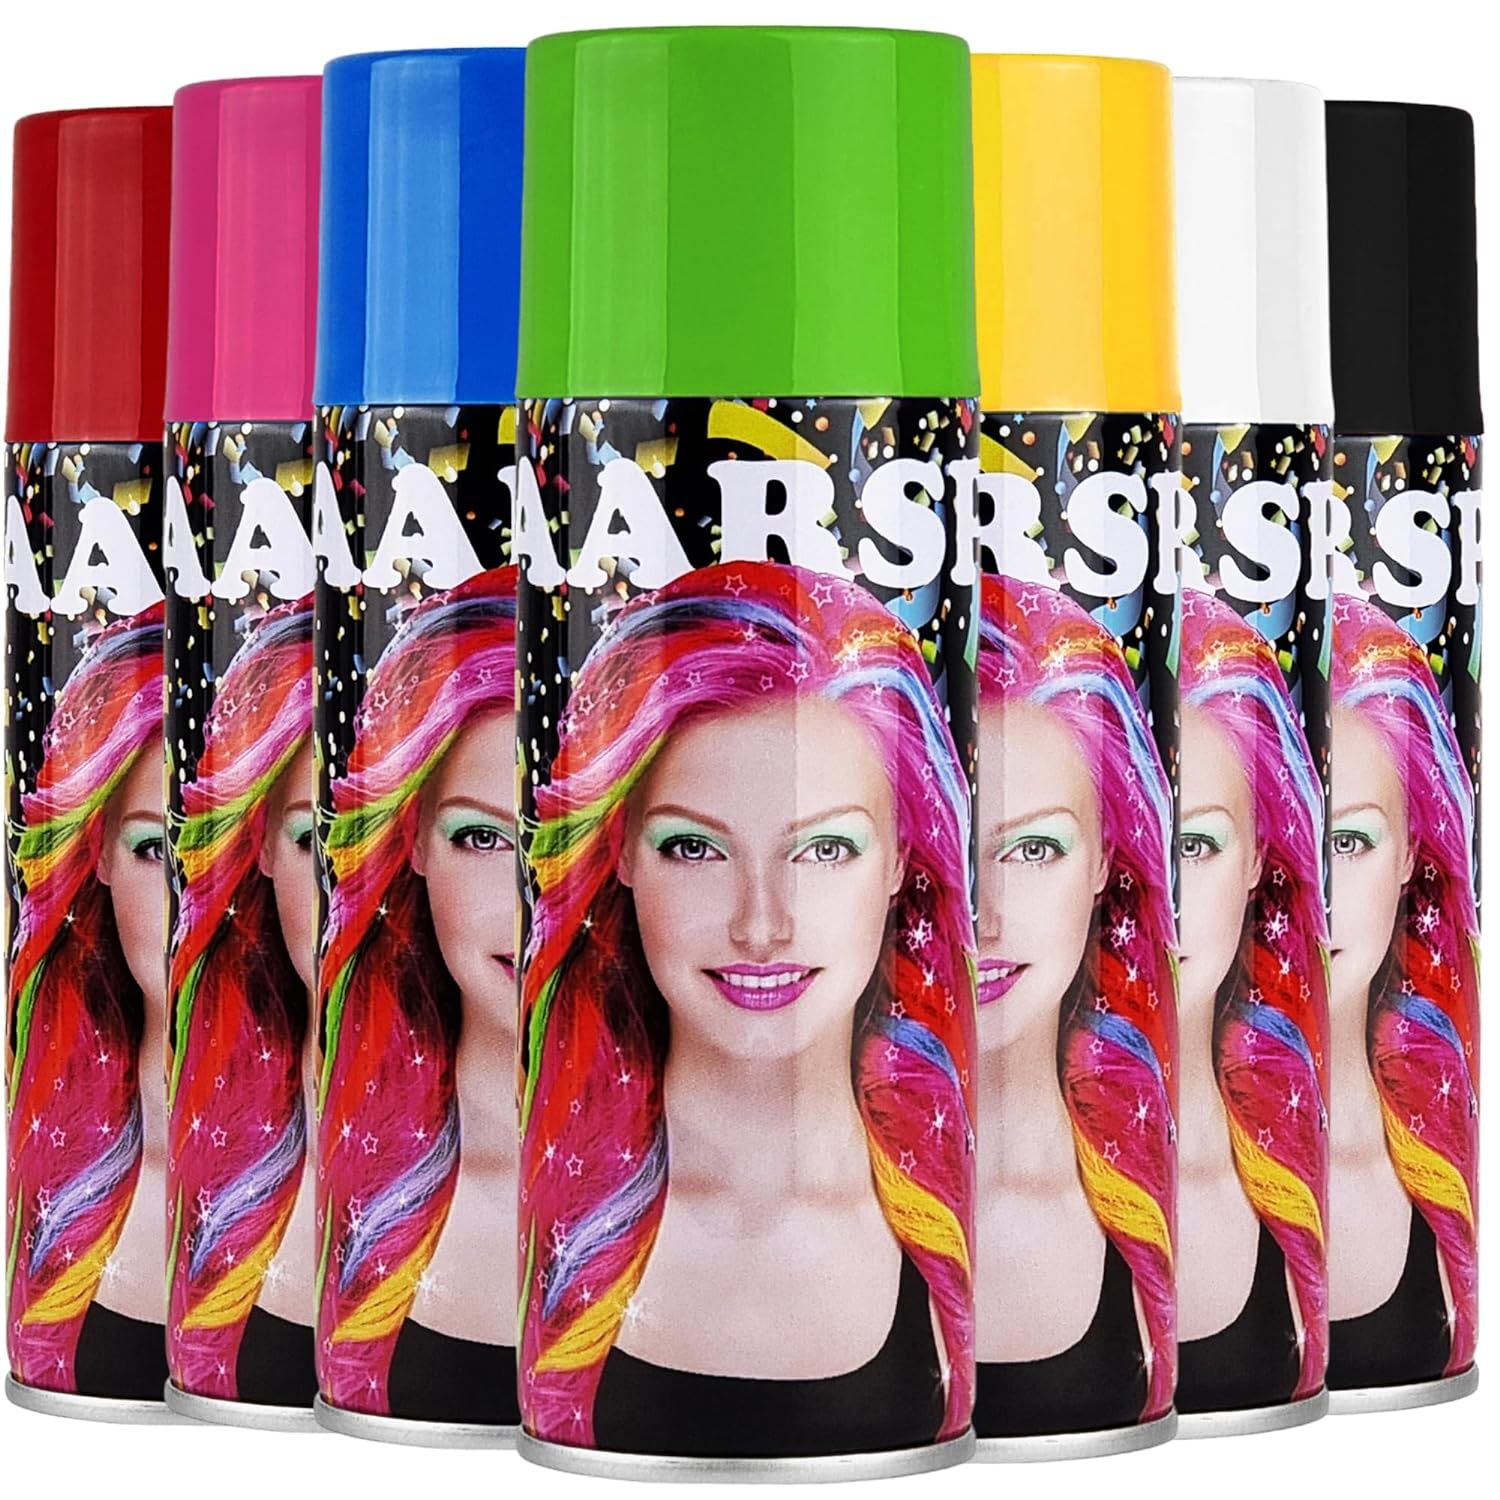 Colored Hair Spray for ColoURFUL Hair - 250 ml - in 7 Different Colors - Washes Out - Great Hair Color for Cosplay Halloween or Carnival - Pink